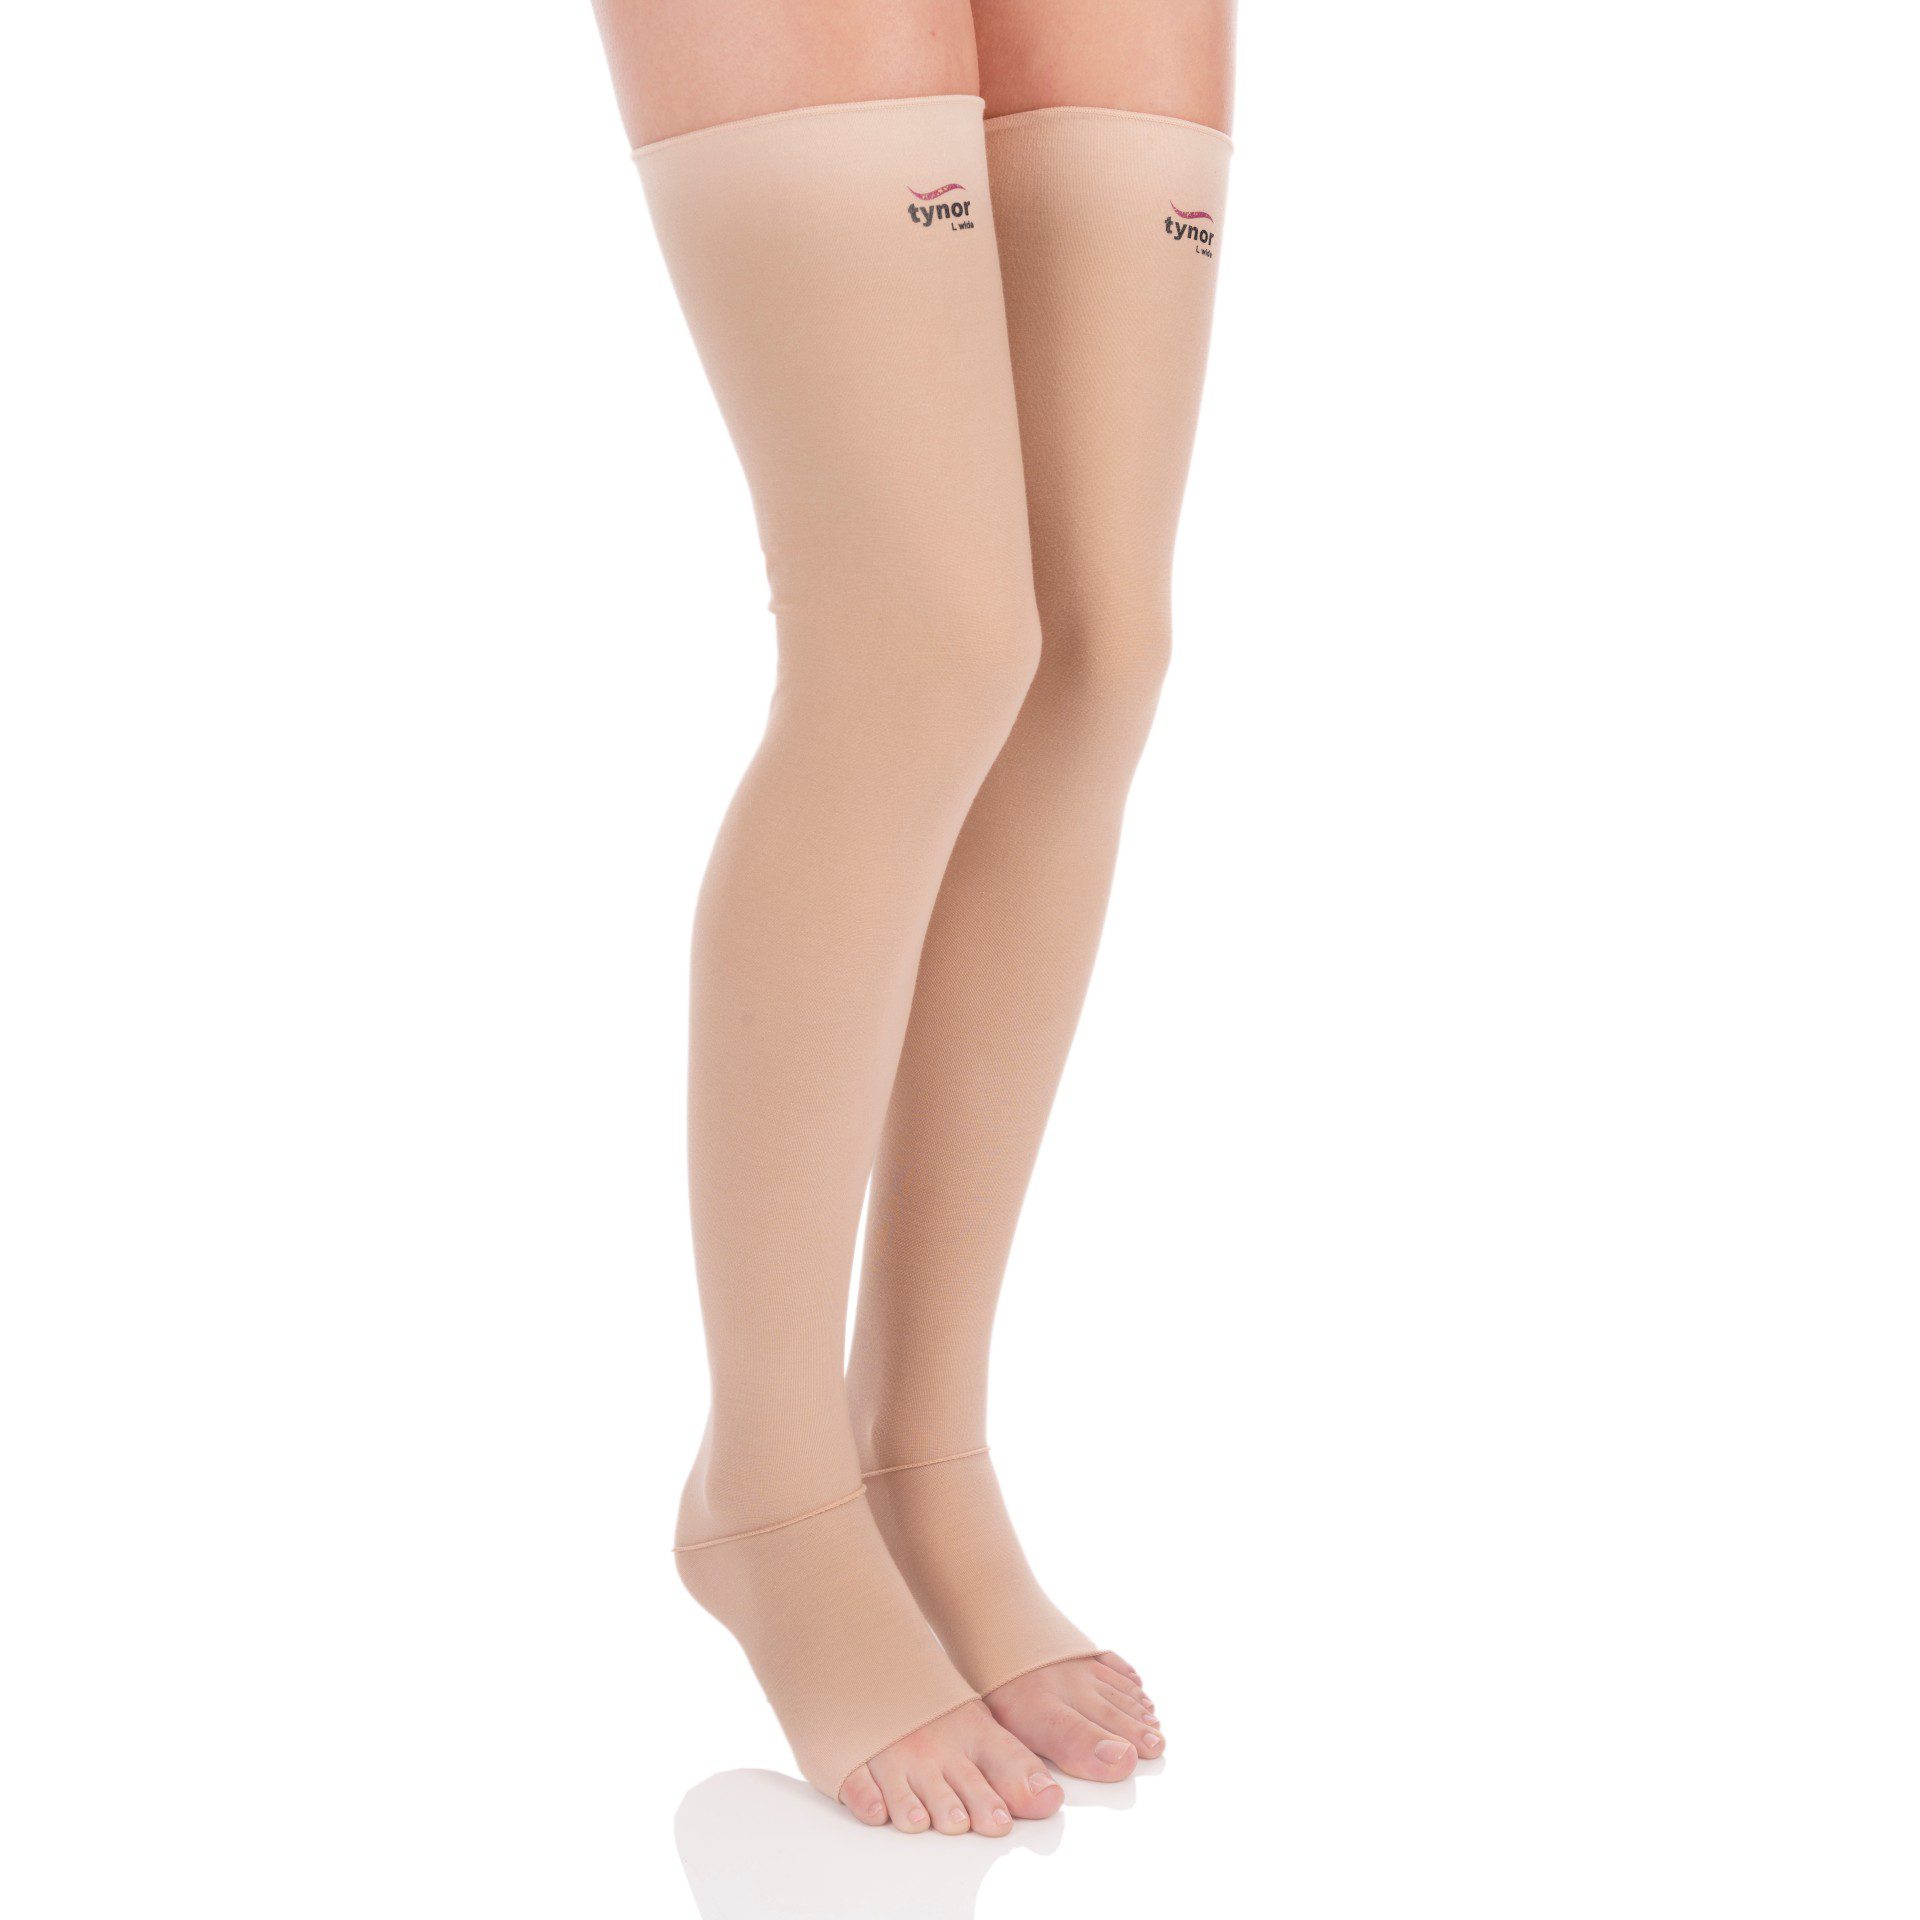 https://surgicalshoppe.co.in/wp-content/uploads/2023/03/Tynor-Compression-Stocking-Mid-Thigh-Classic.jpg